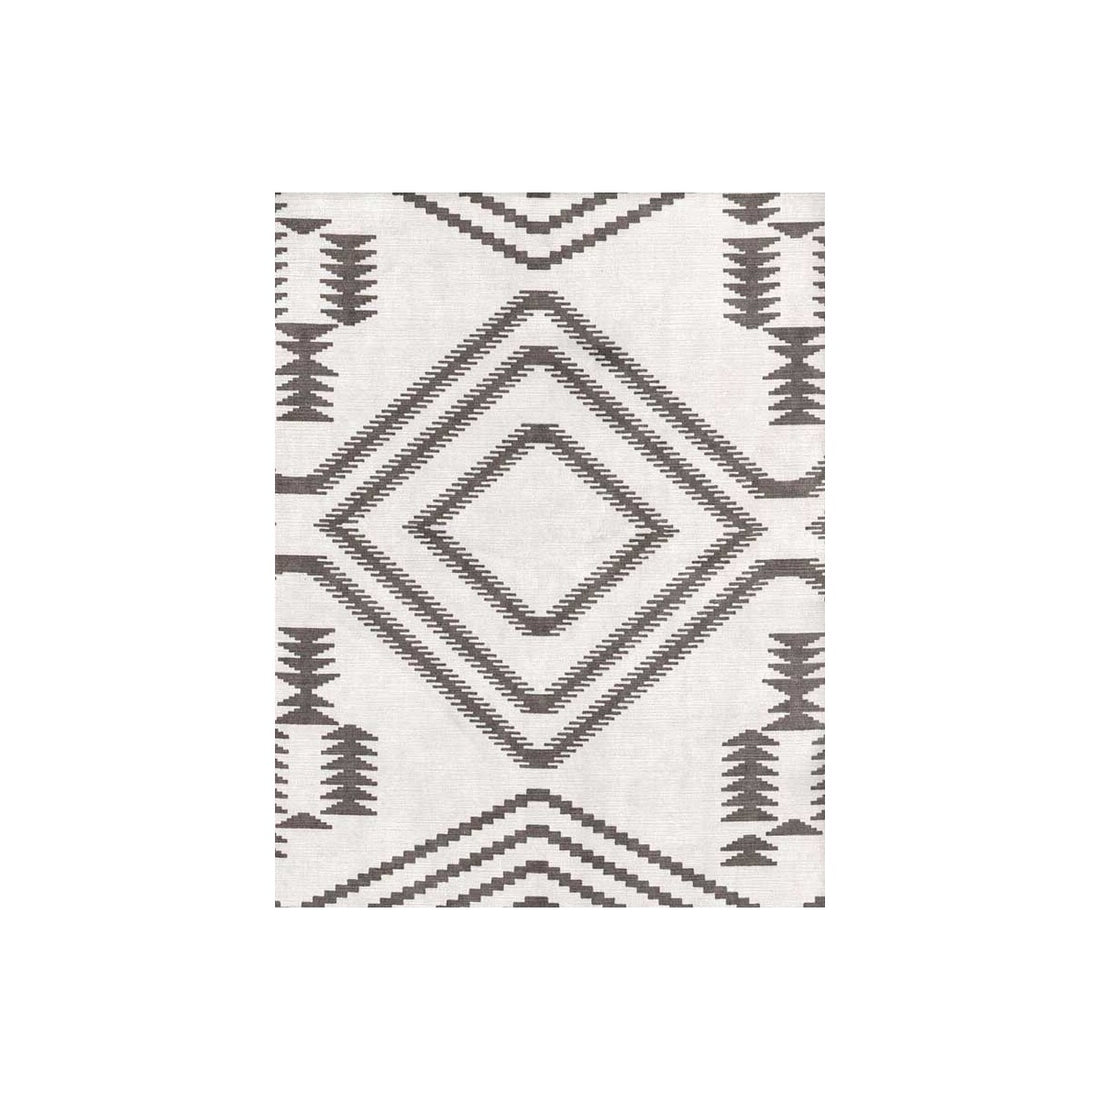 Navaho fabric in grey color - pattern AM100059.11.0 - by Kravet Couture in the Andrew Martin Compass Indiana collection